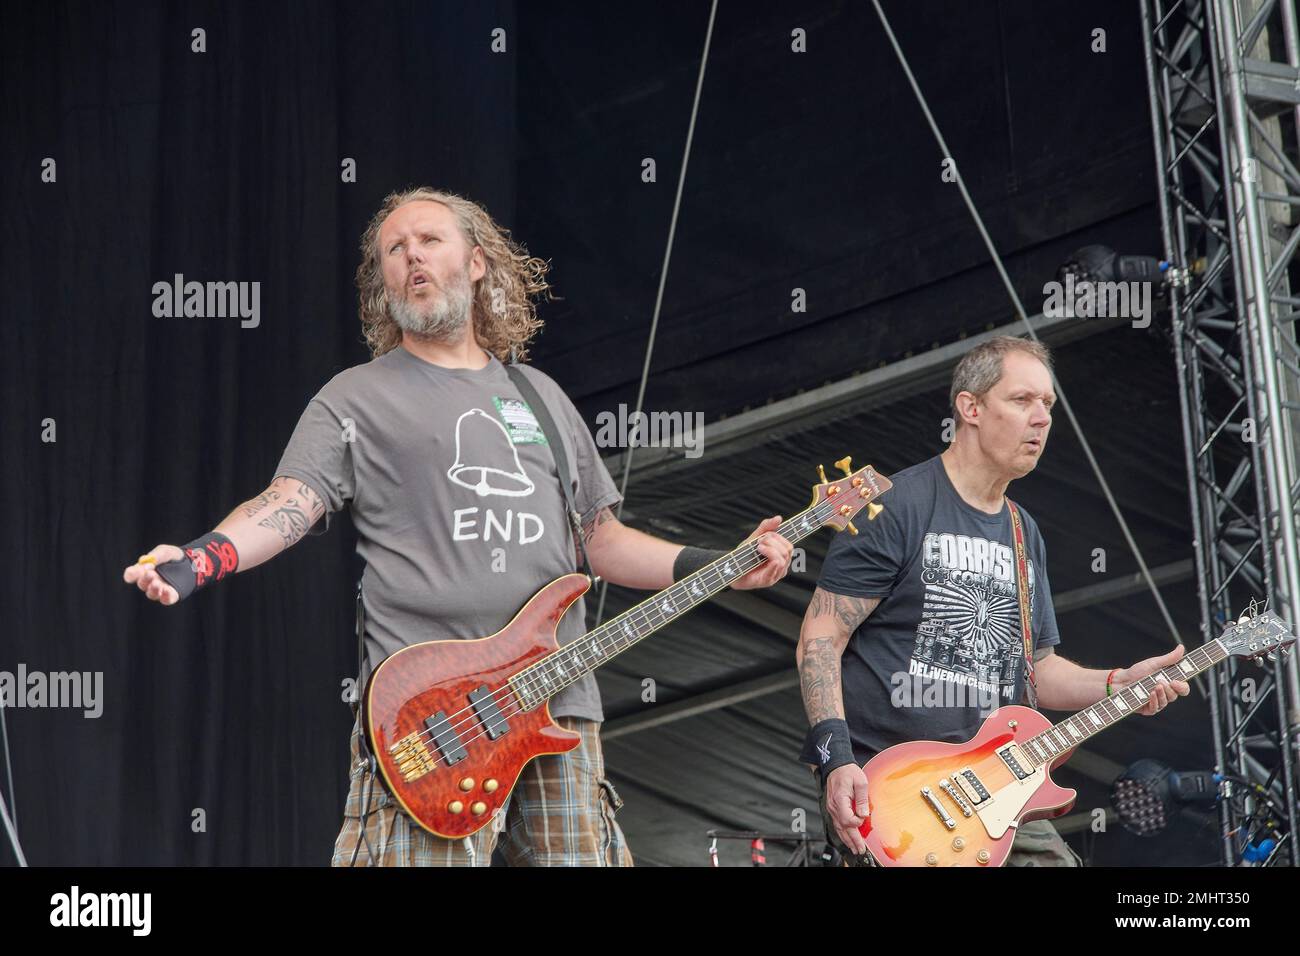 09 Jun 2018. Donnington Park, Derbyshire, United Kingdom. Chris Parkes and Paddy O'Malley of Lawnmower Deth Perform at Download Festival 2018. Credit: Will Tudor/Alamy Stock Photo